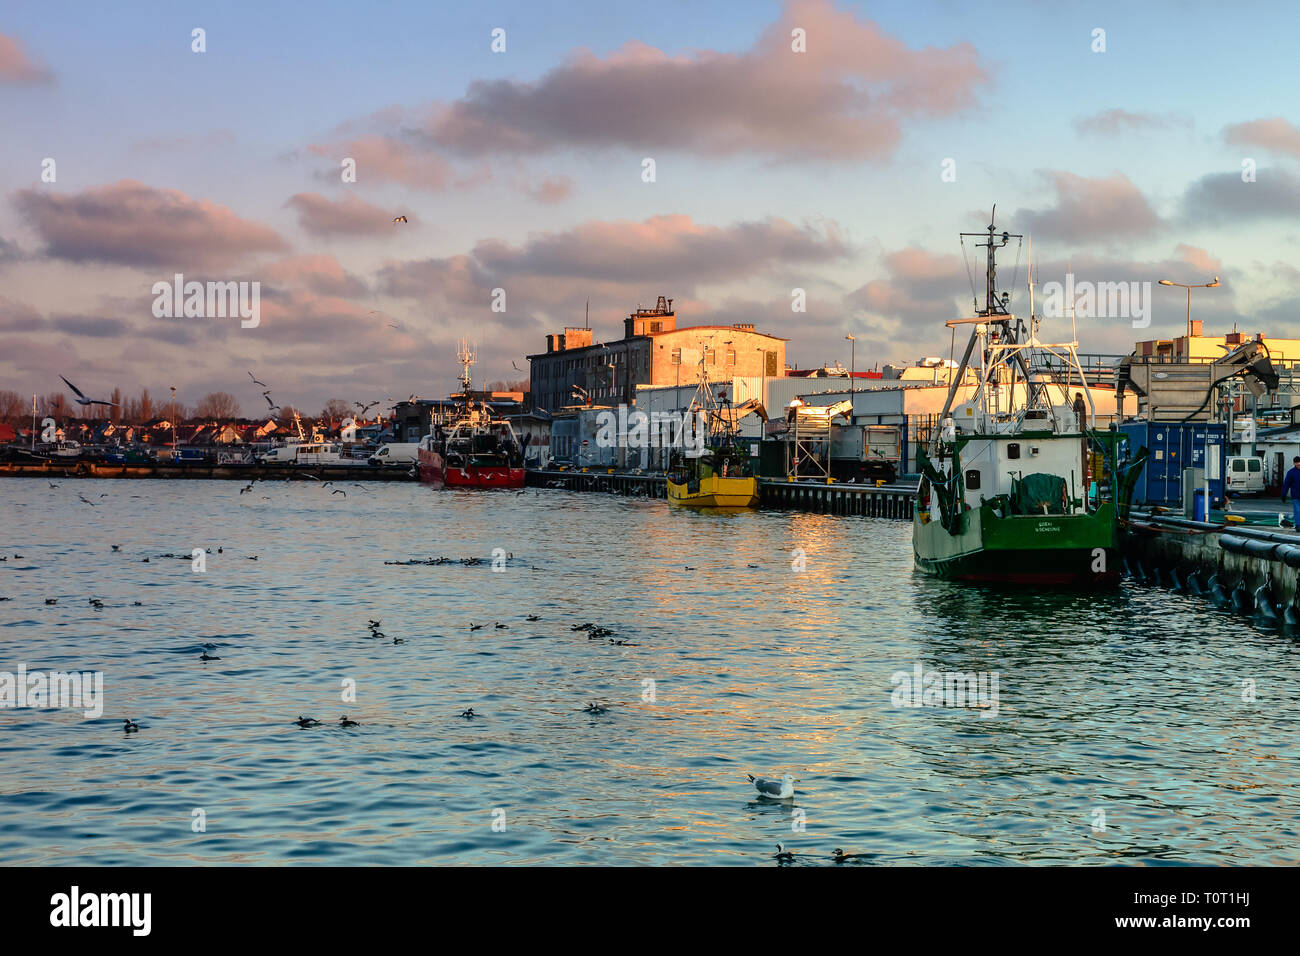 Hel Peninsula, Poland, January 23, 2019: Hel port in winter time at the morning Stock Photo